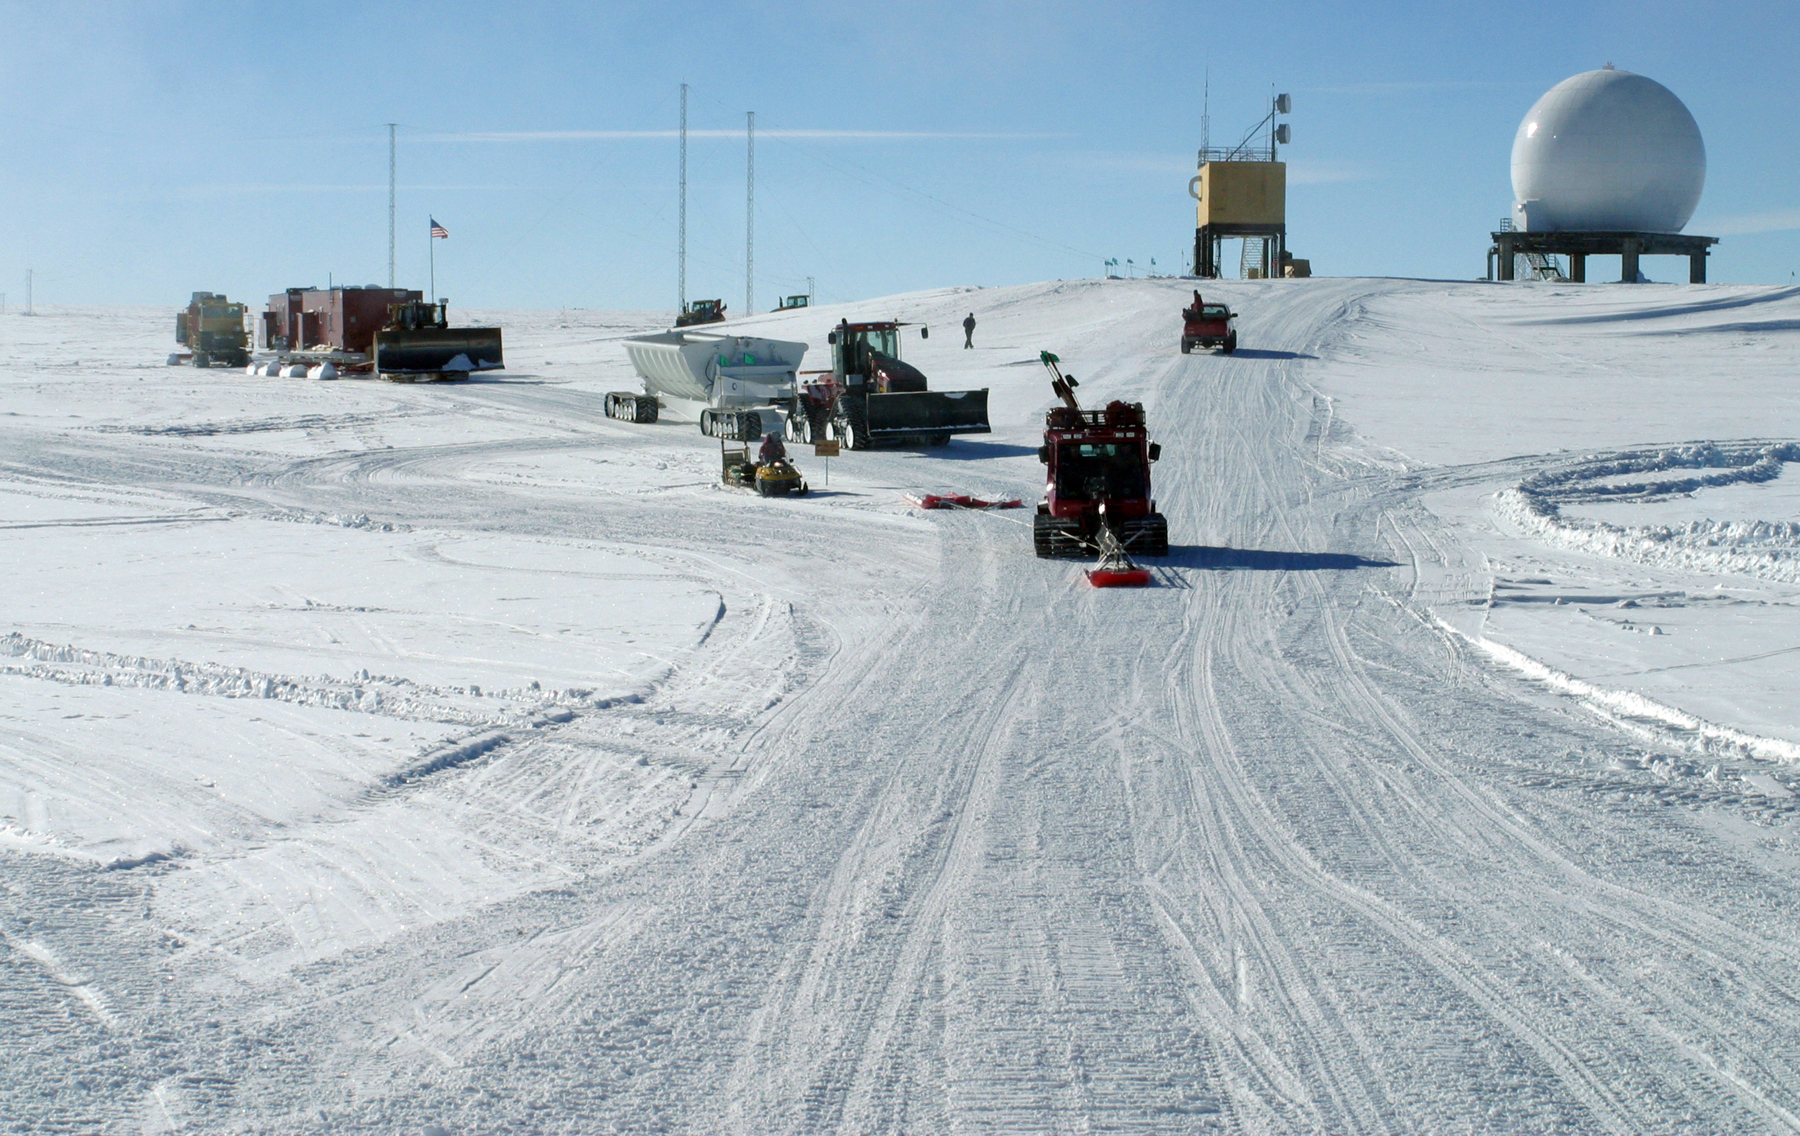 A snow route with several vehicles on it.